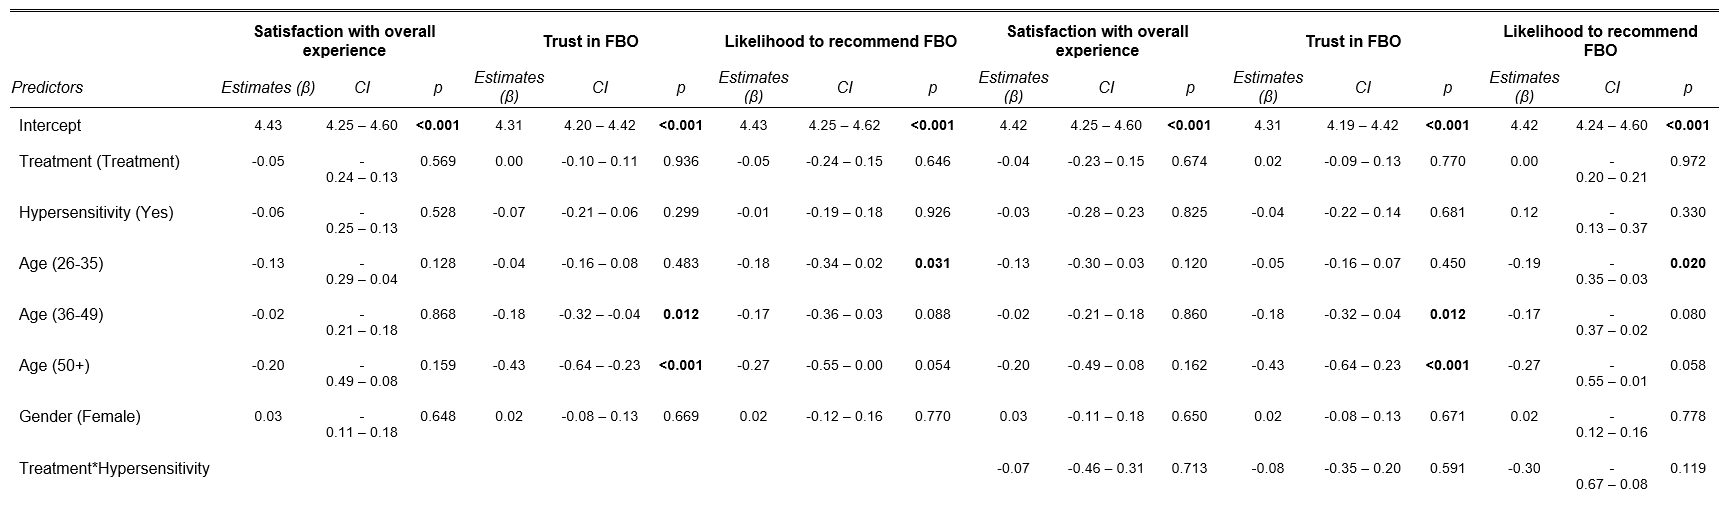 Satisfaction with overall experience is a common header for the second to the fourth columns. Estimates, confidence interval and p-value for satisfaction are shown in the second, third and fourth column respectively. Trust in FBO is a common header for the fifth to the seventh columns. Estimates, confidence interval and p-value for trust are shown in the fifth, sixth and seventh column respectively. Likelihood to recommend FBO is a common header for the eighth to the tenth columns. Estimates, confidence int